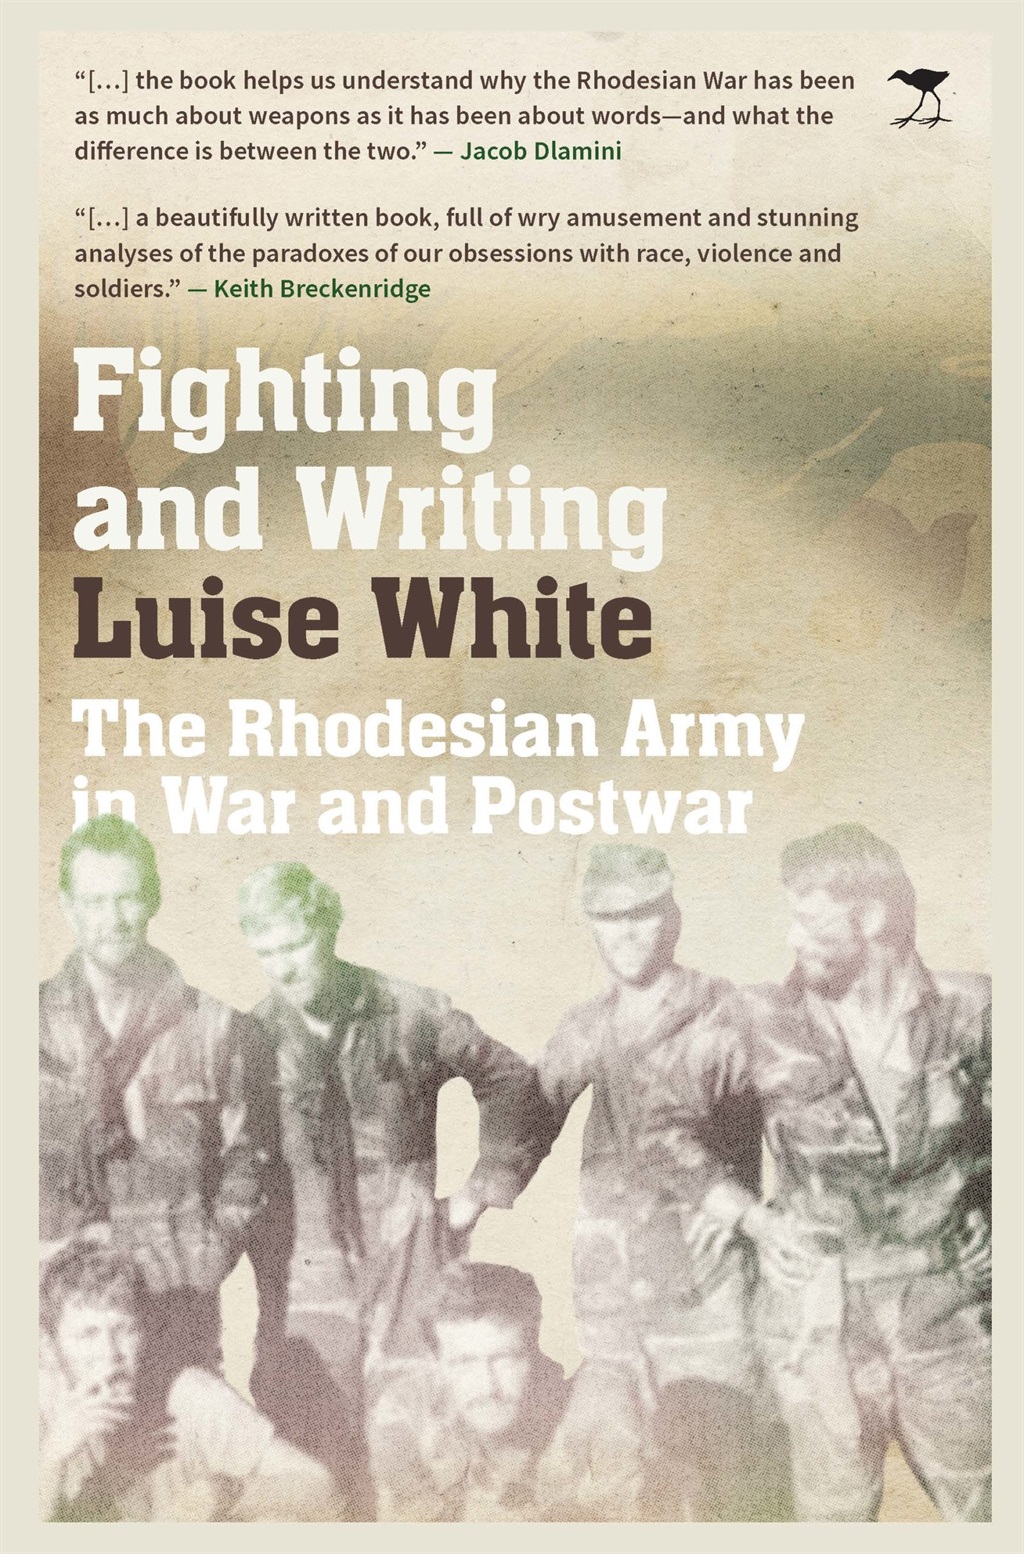 Fighting and Writing: The Rhodesian Army in War and Postwar by Luise White (Jacana)